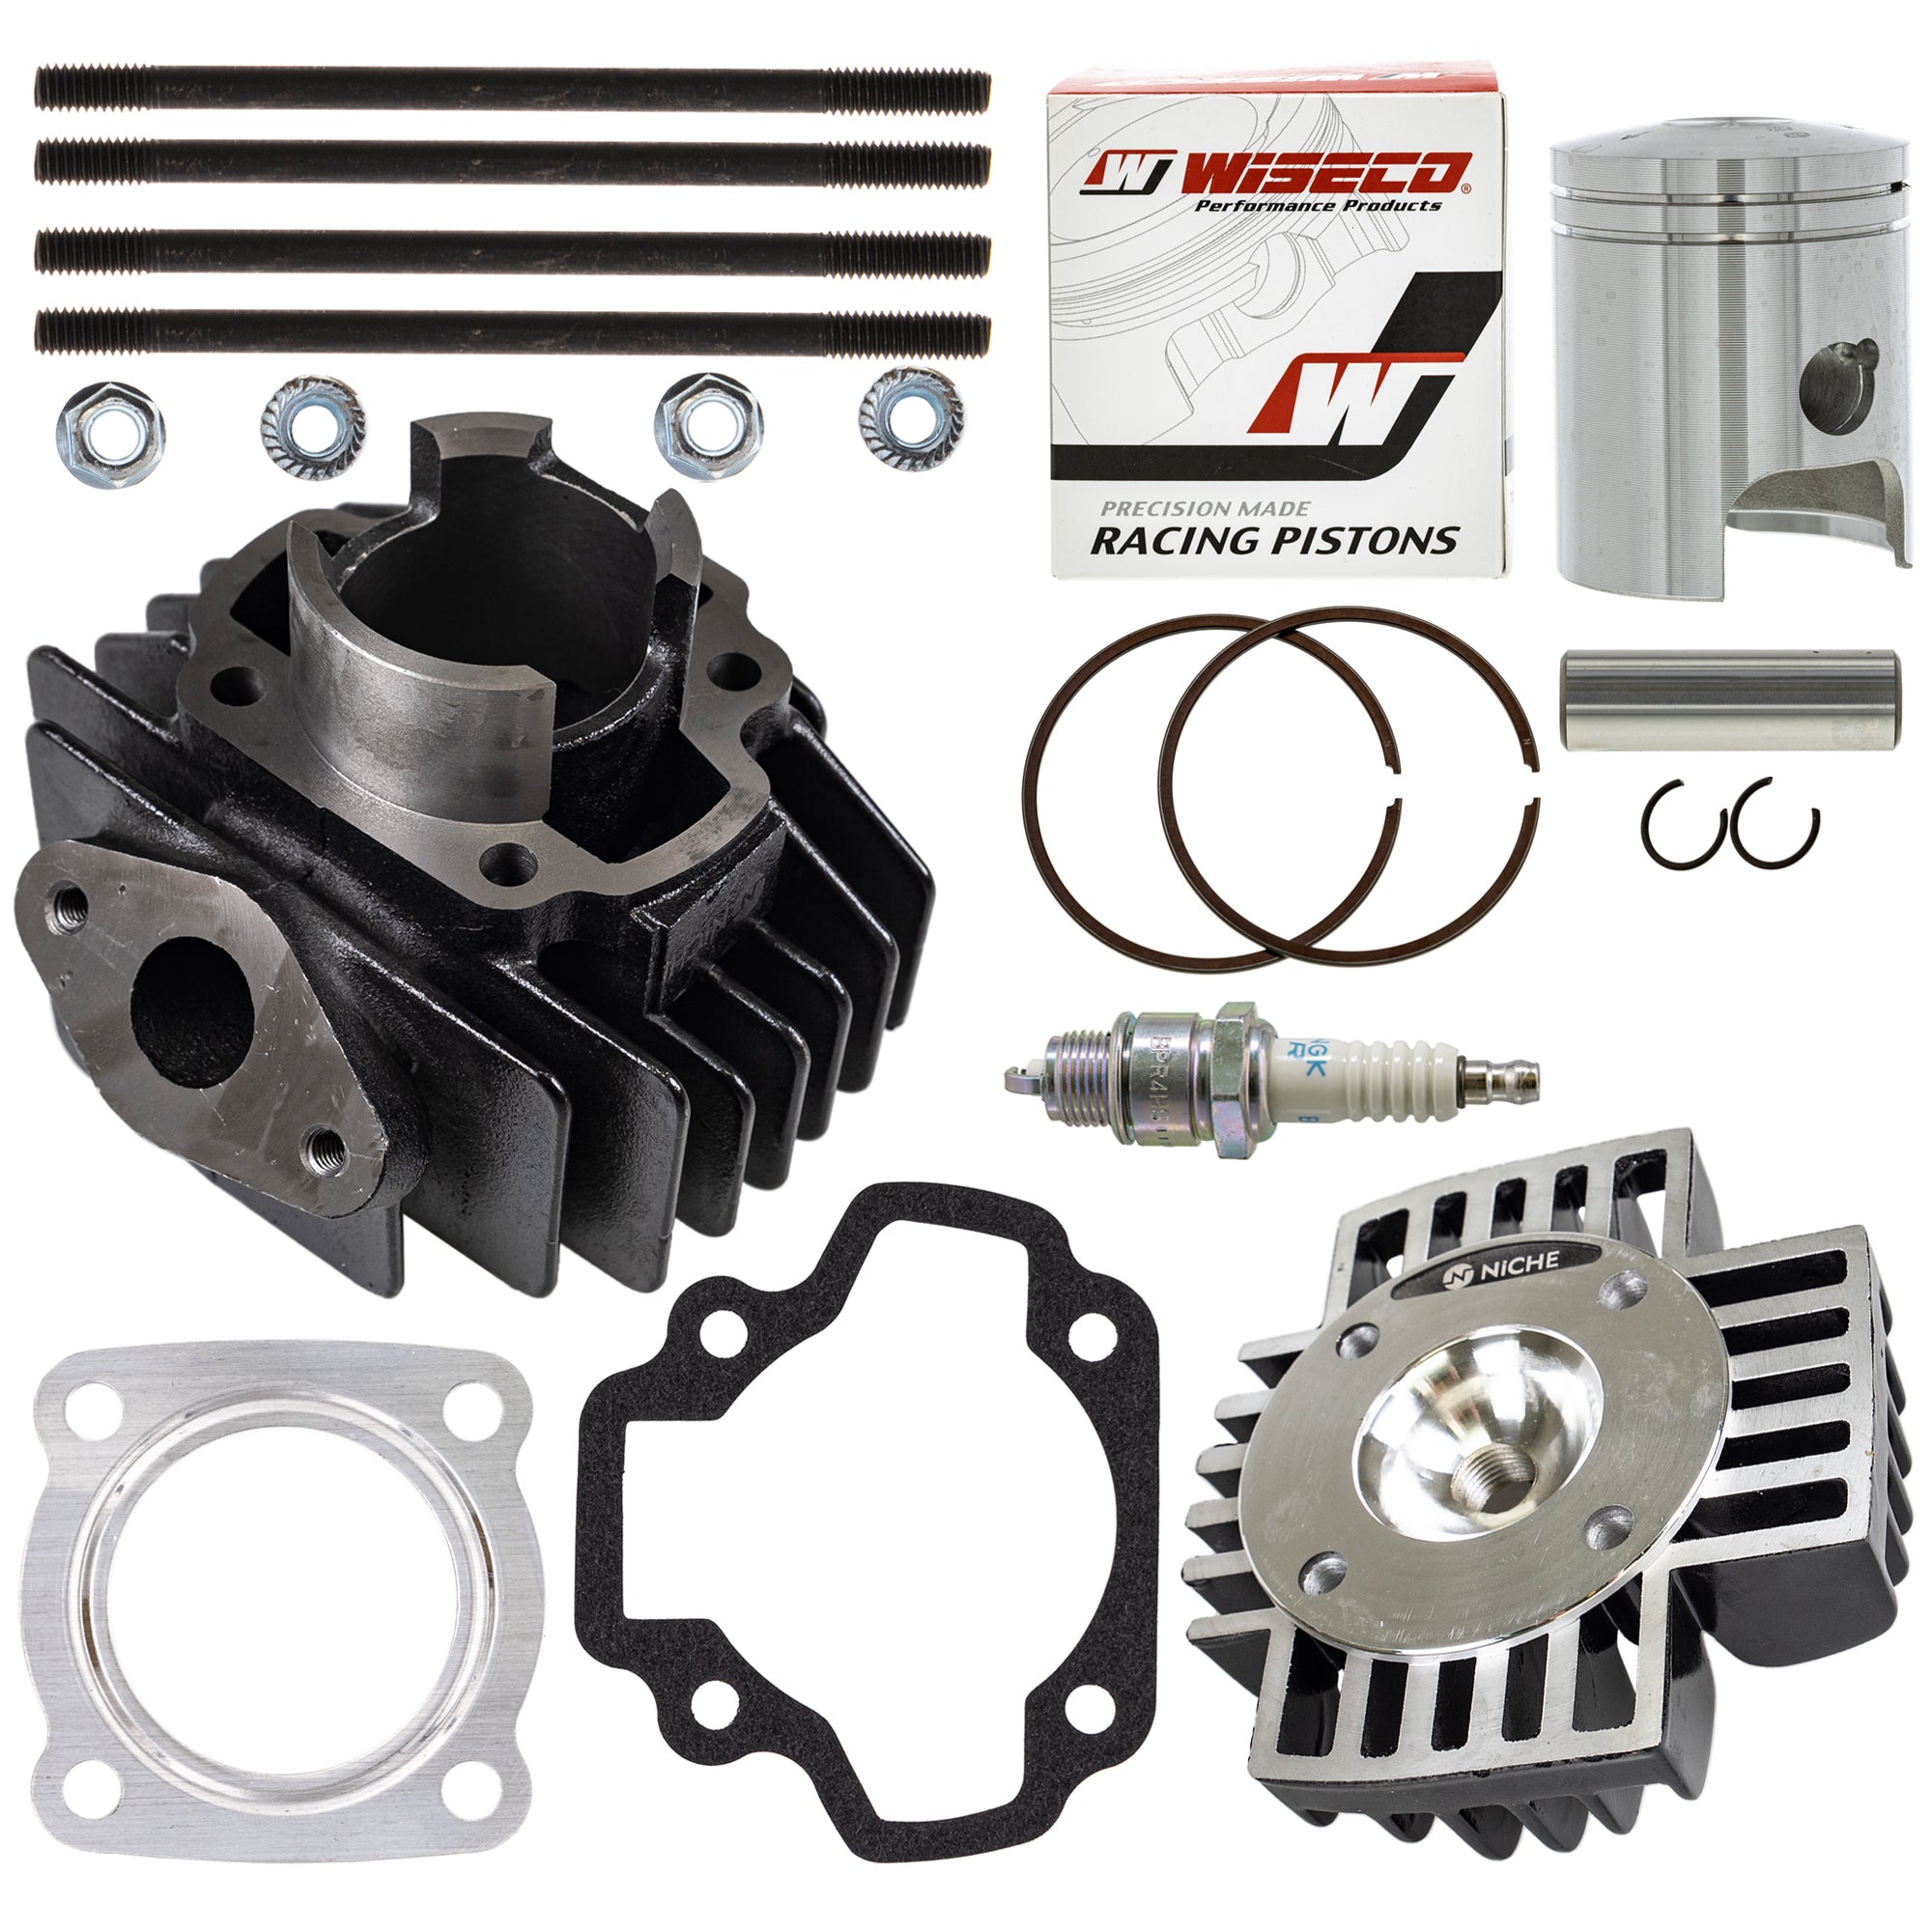 Cylinder Piston Gasket Head Top End Kit for zOTHER Yamaha PW50 NICHE MK1012020